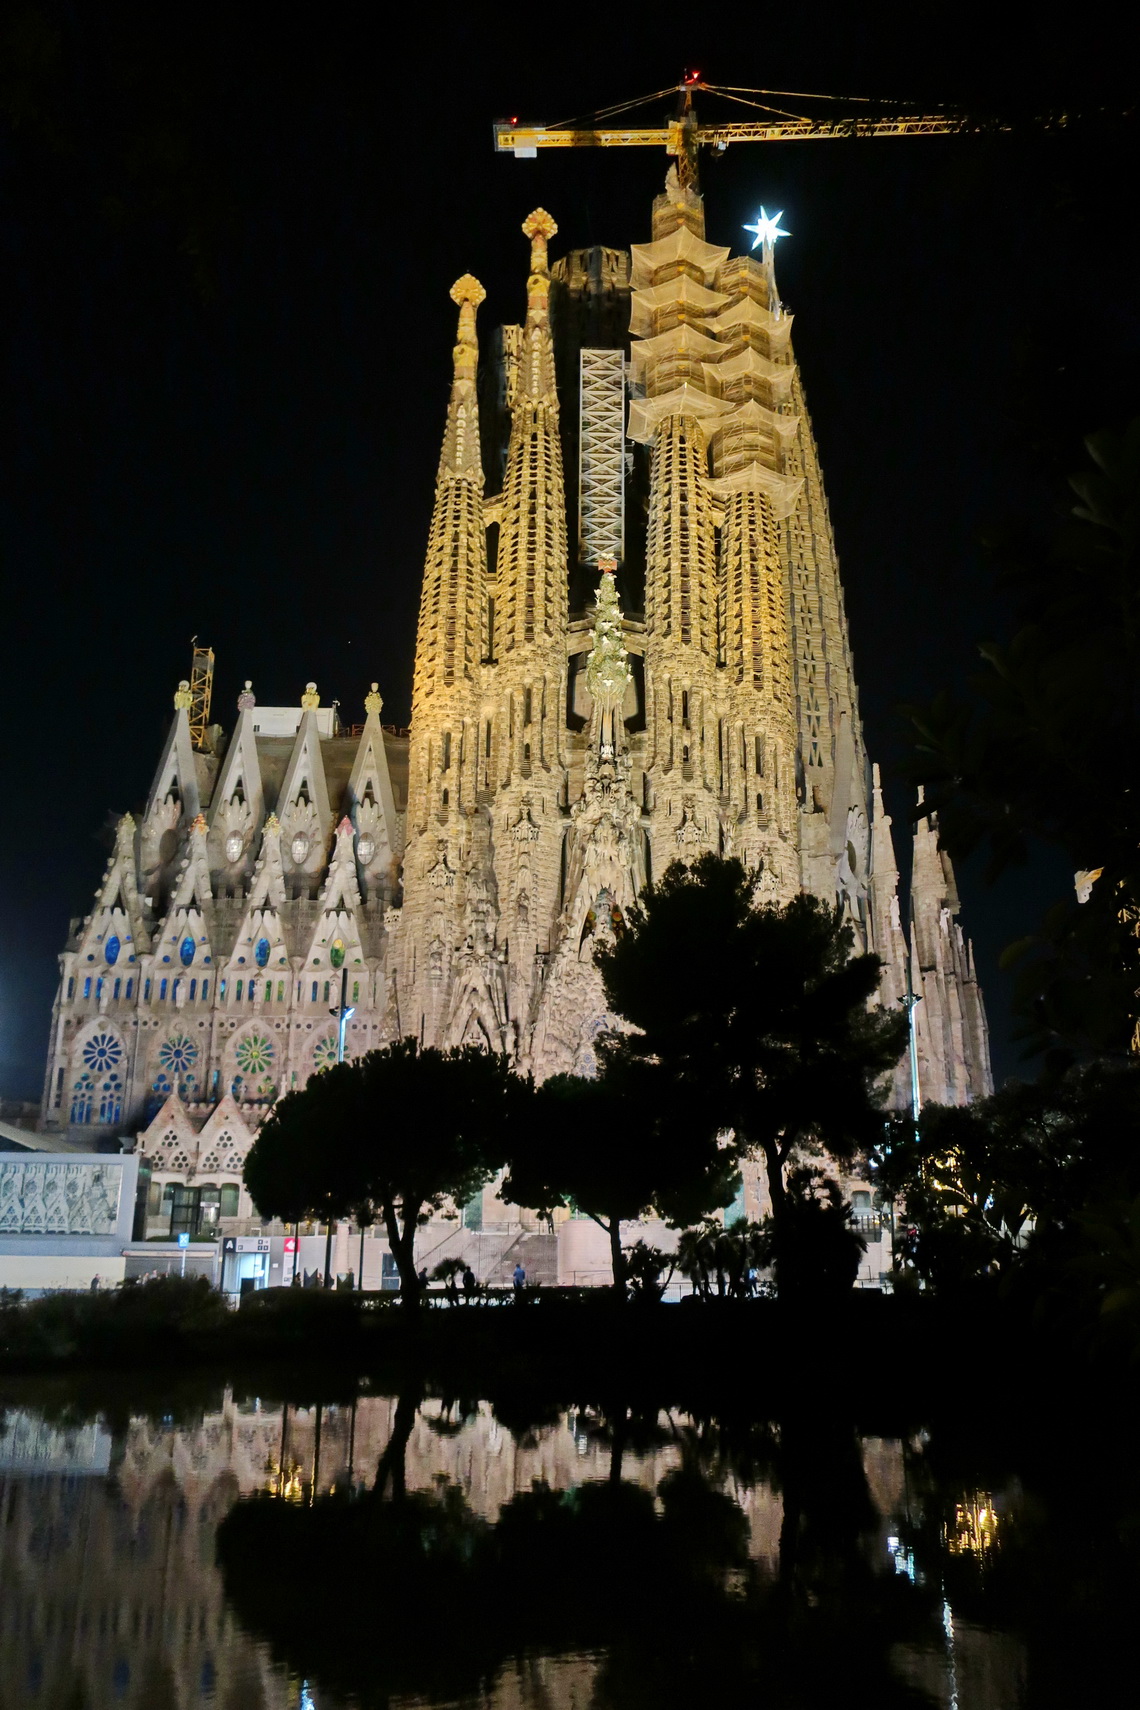 Cathedral La Sagrada Familia - another masterpiece of Antonio Gaudi in Barcelona - still not finished. Gaudi died in the year 1926!